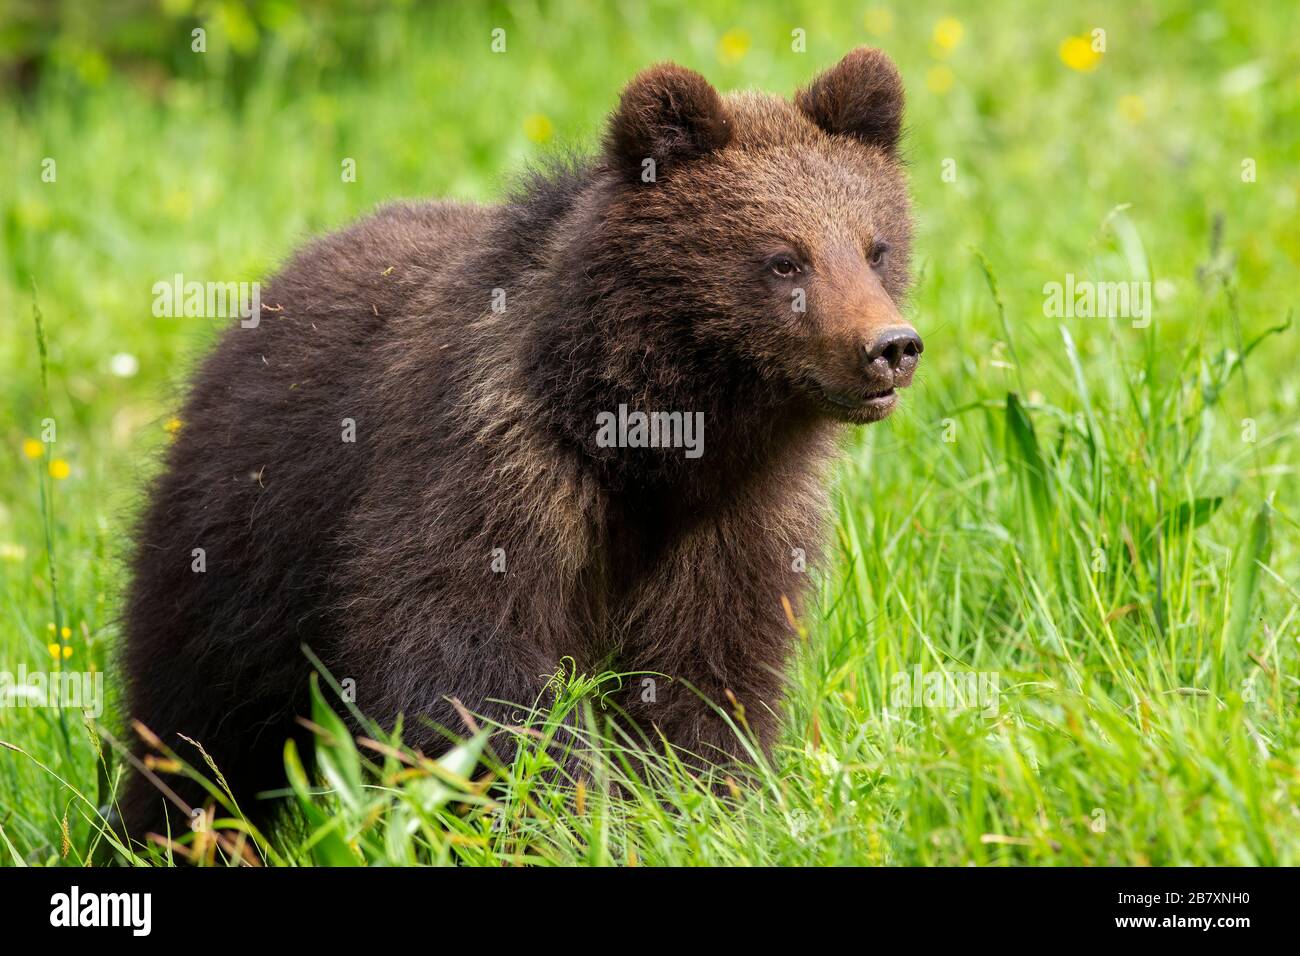 Baby brown bear cub standing on meadow with green grass in spring Stock Photo